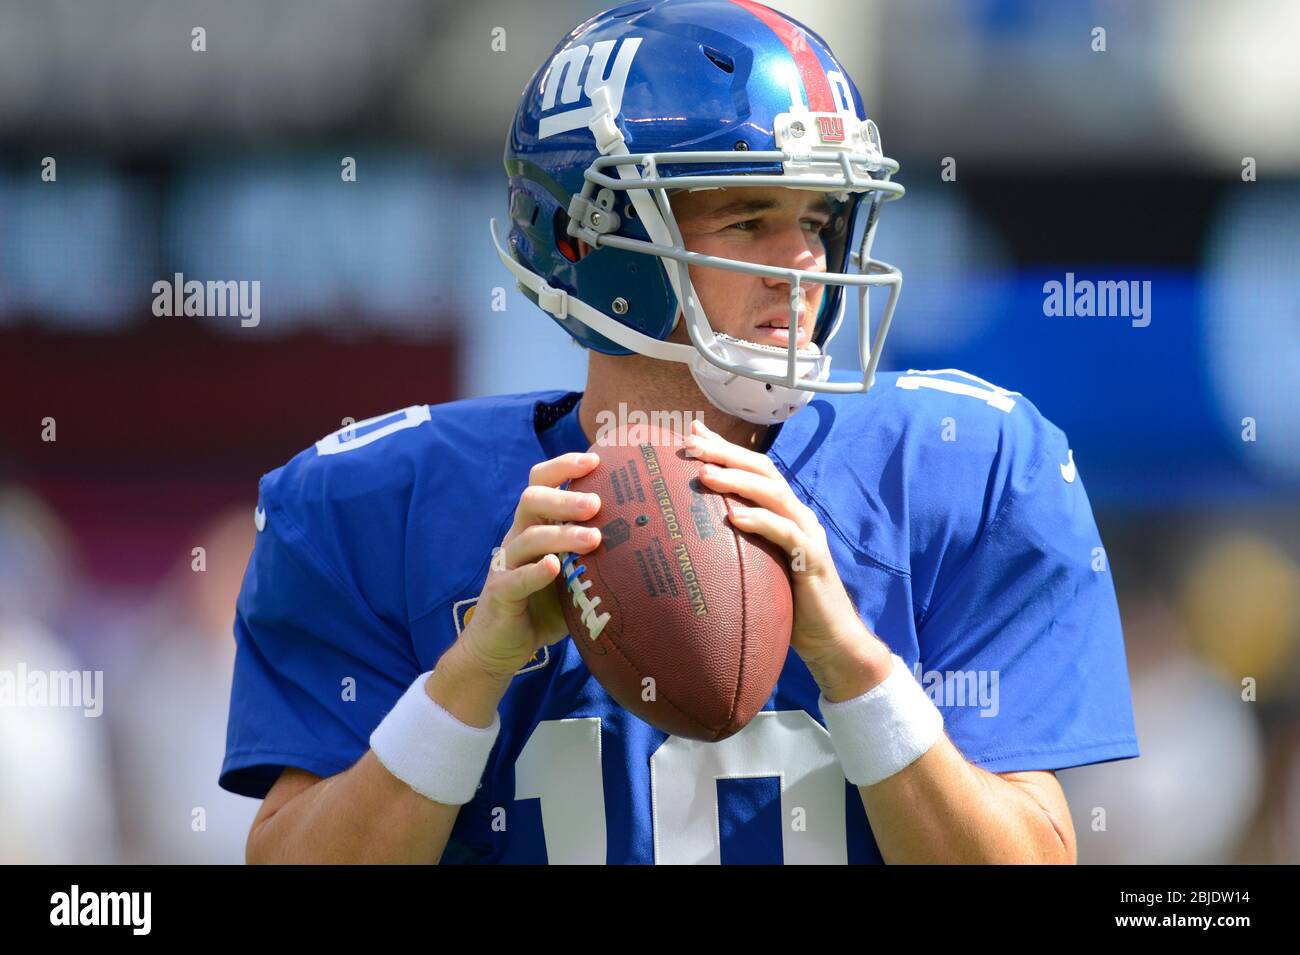 16 September 2012: New York Giants quarterback Eli Manning (10) during a week 2 NFL NFC matchup between the Tampa Bay Buccaneers and New York Giants a Stock Photo